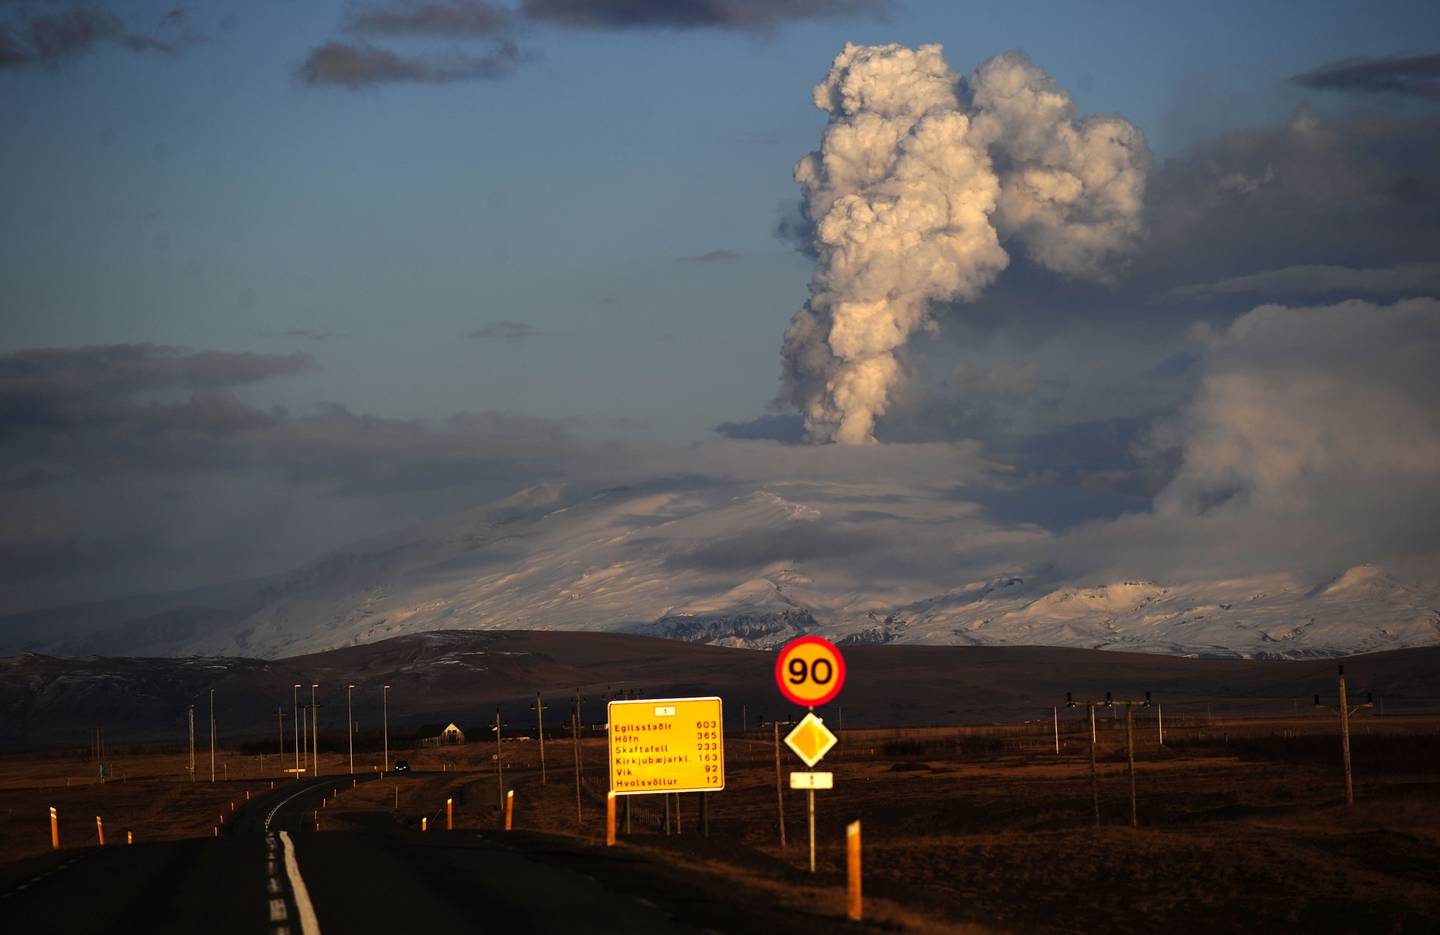 Smoke and ash bellow from Eyjafjallajökull volcano as it is seen from Hella, Iceland, on April 22, 2010. Hundreds of thousands of travellers were left stranded across the globe by the shutdown which began April 15, having to shell out for hotels, food and alternative travel arrangements. AFP PHOTO/Emmanuel Dunand